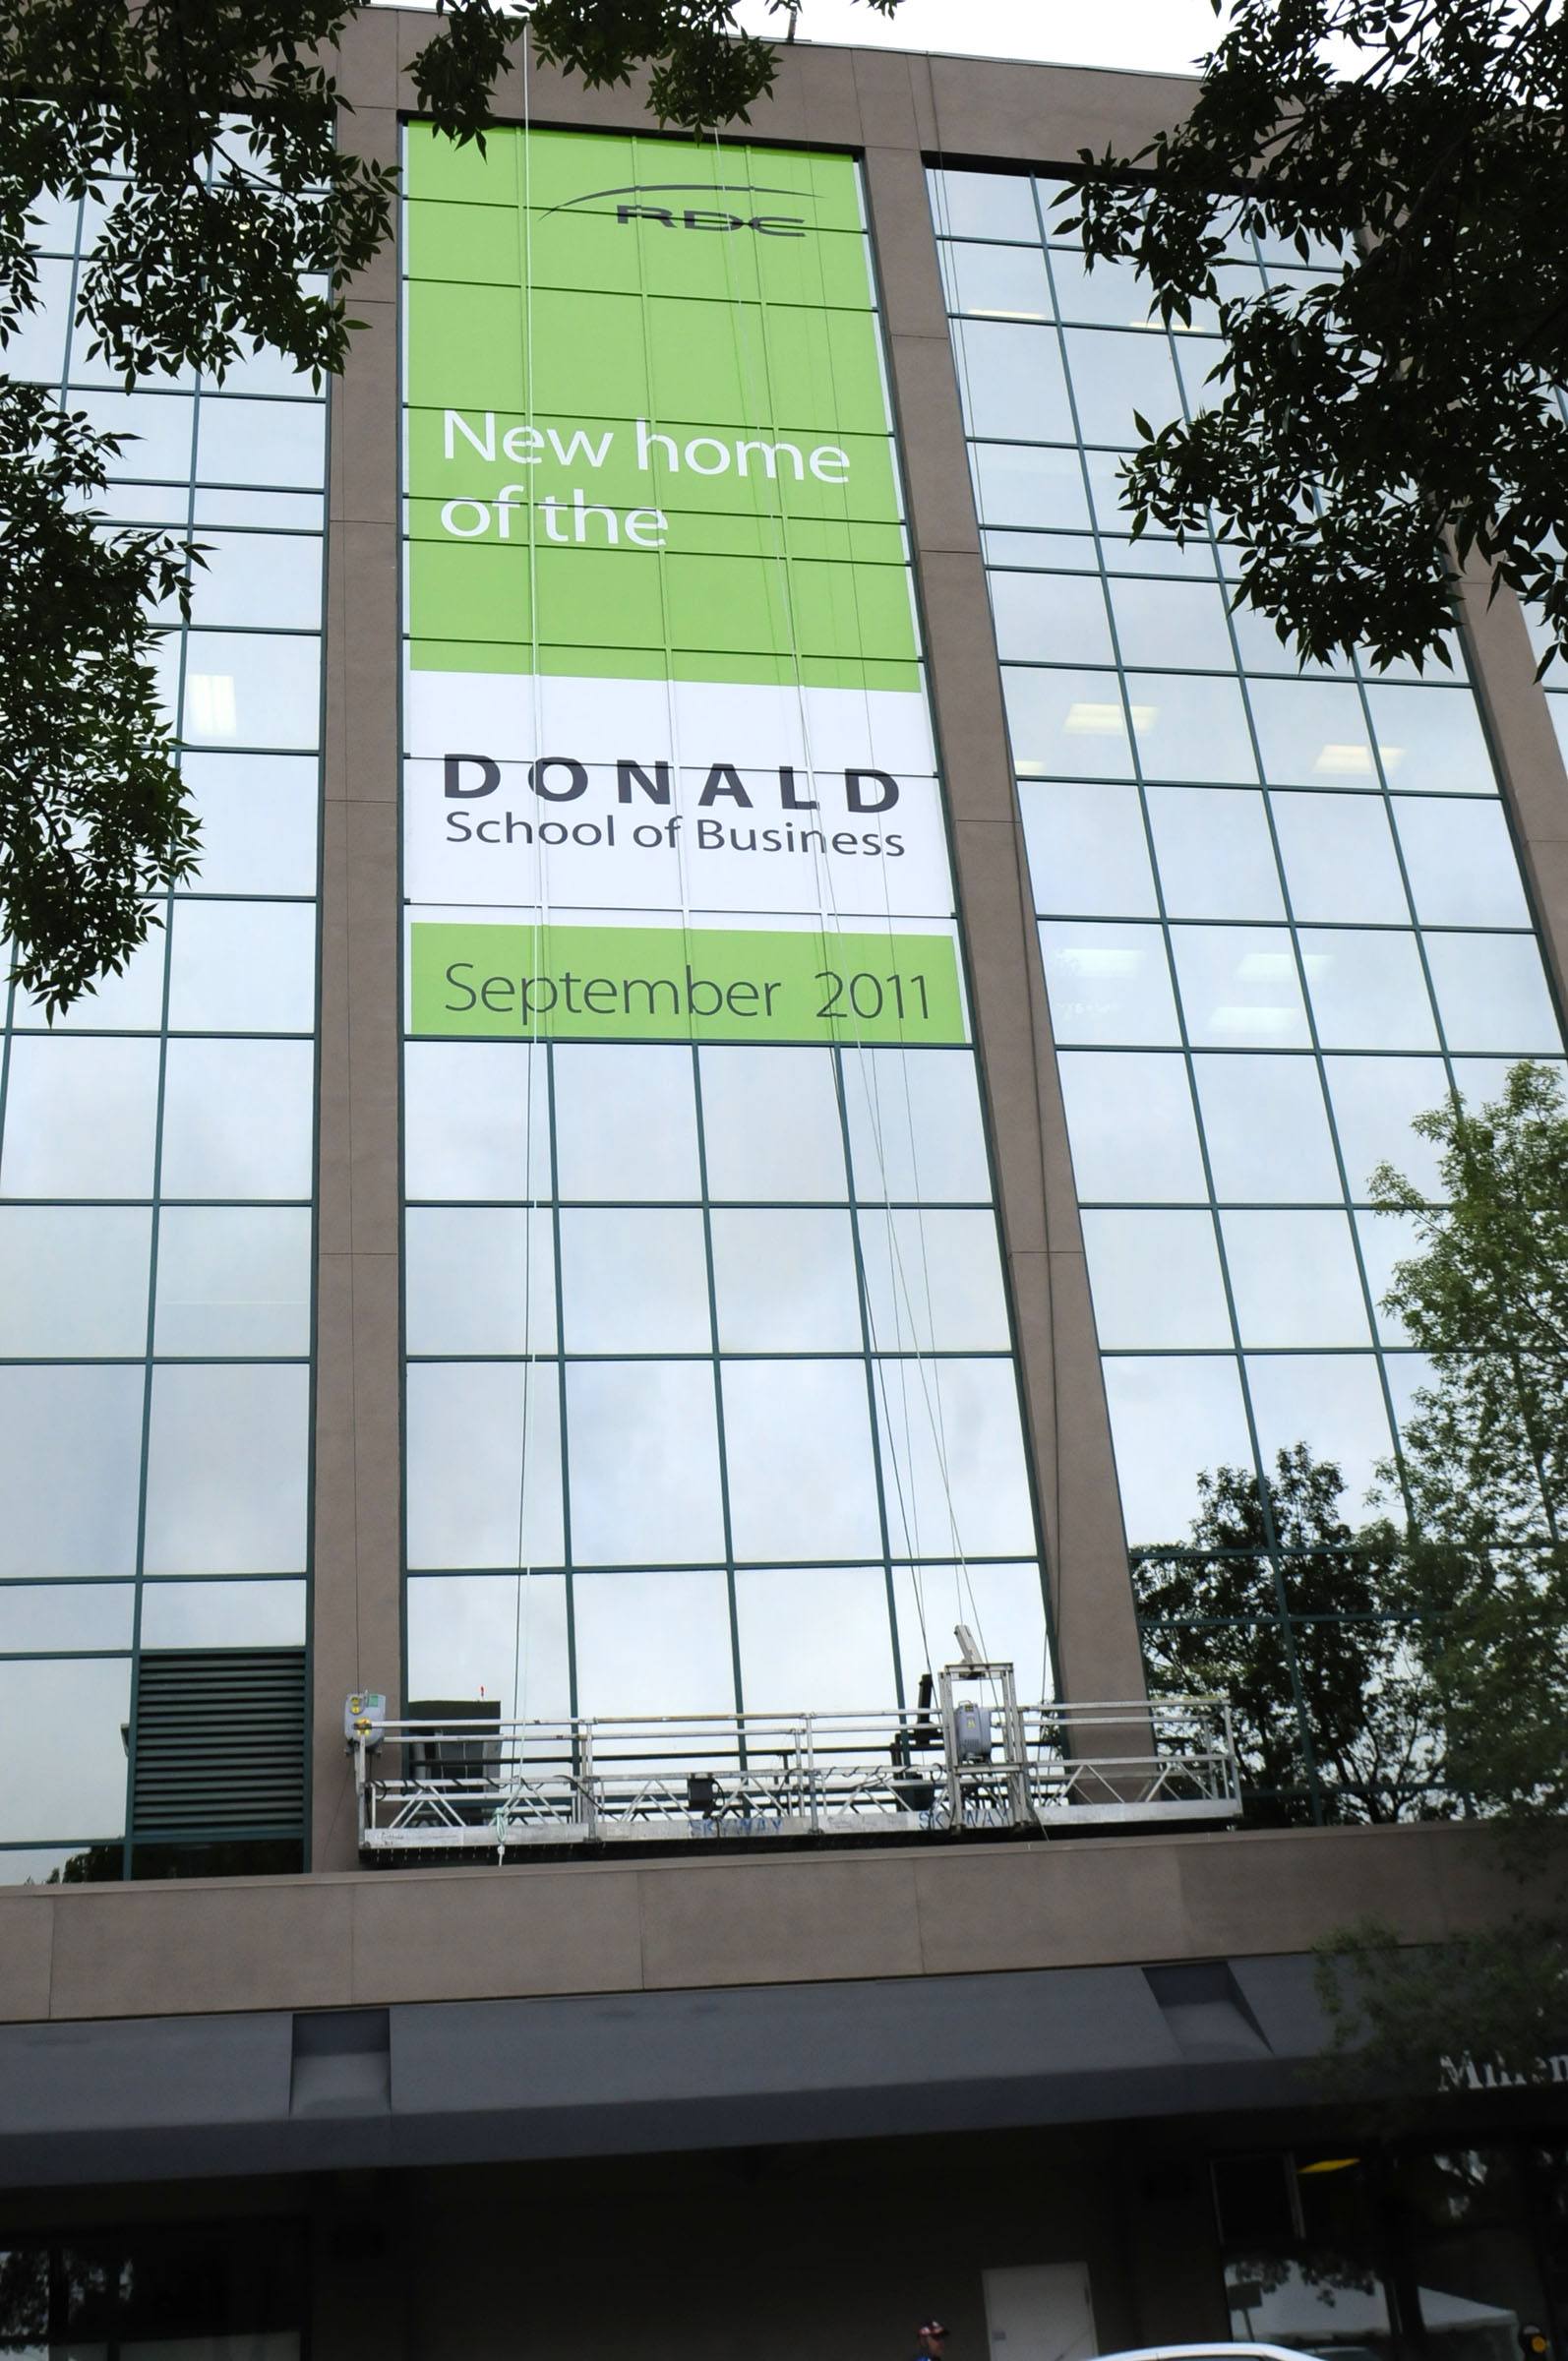 BIG NEWS- Red Deer College officials announced the move of the Donald School of Business fro the main campus to the Millennium Centre downtown during a formal announcement Tuesday.